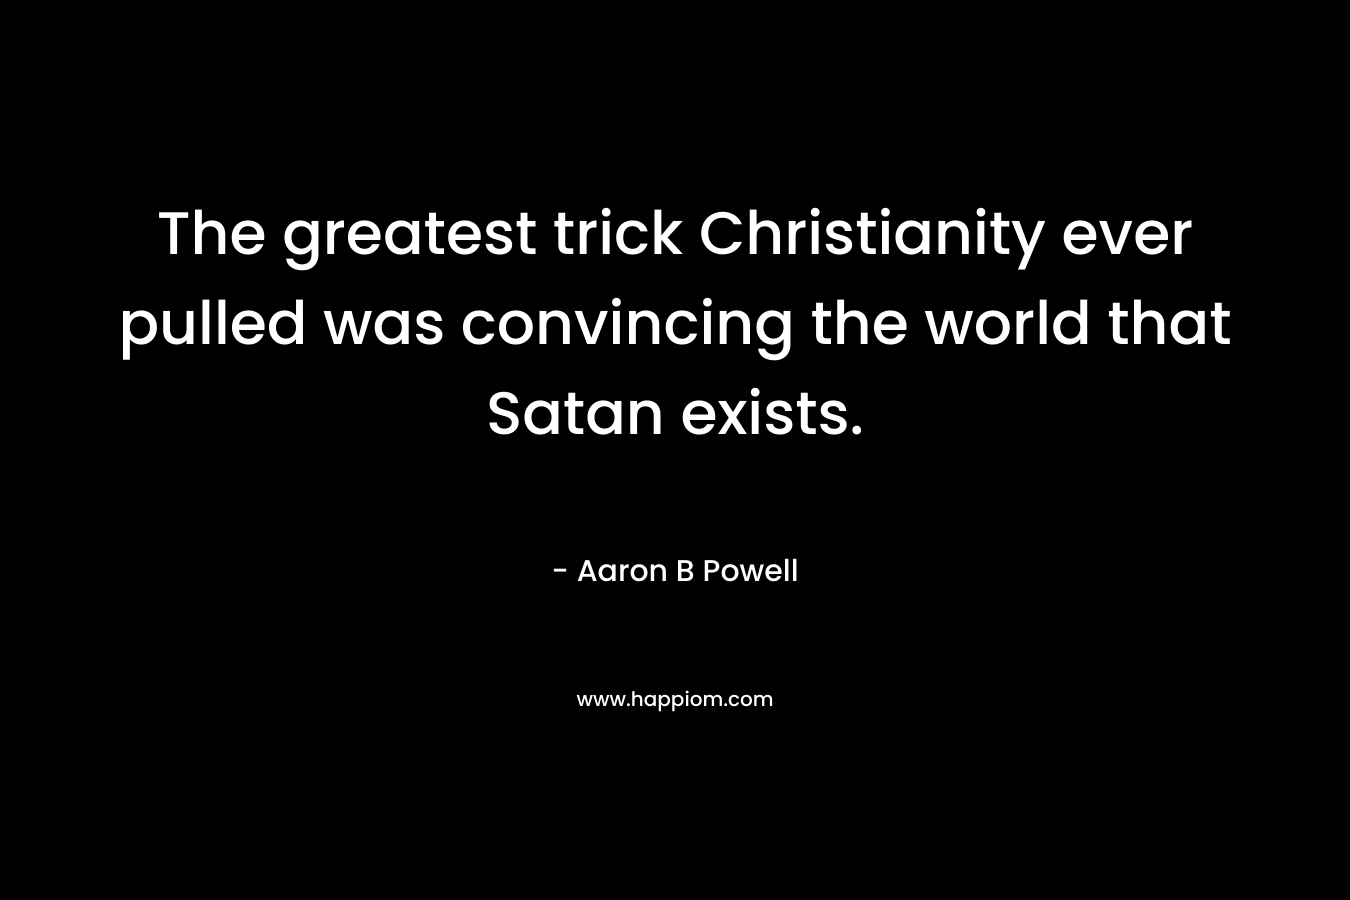 The greatest trick Christianity ever pulled was convincing the world that Satan exists.